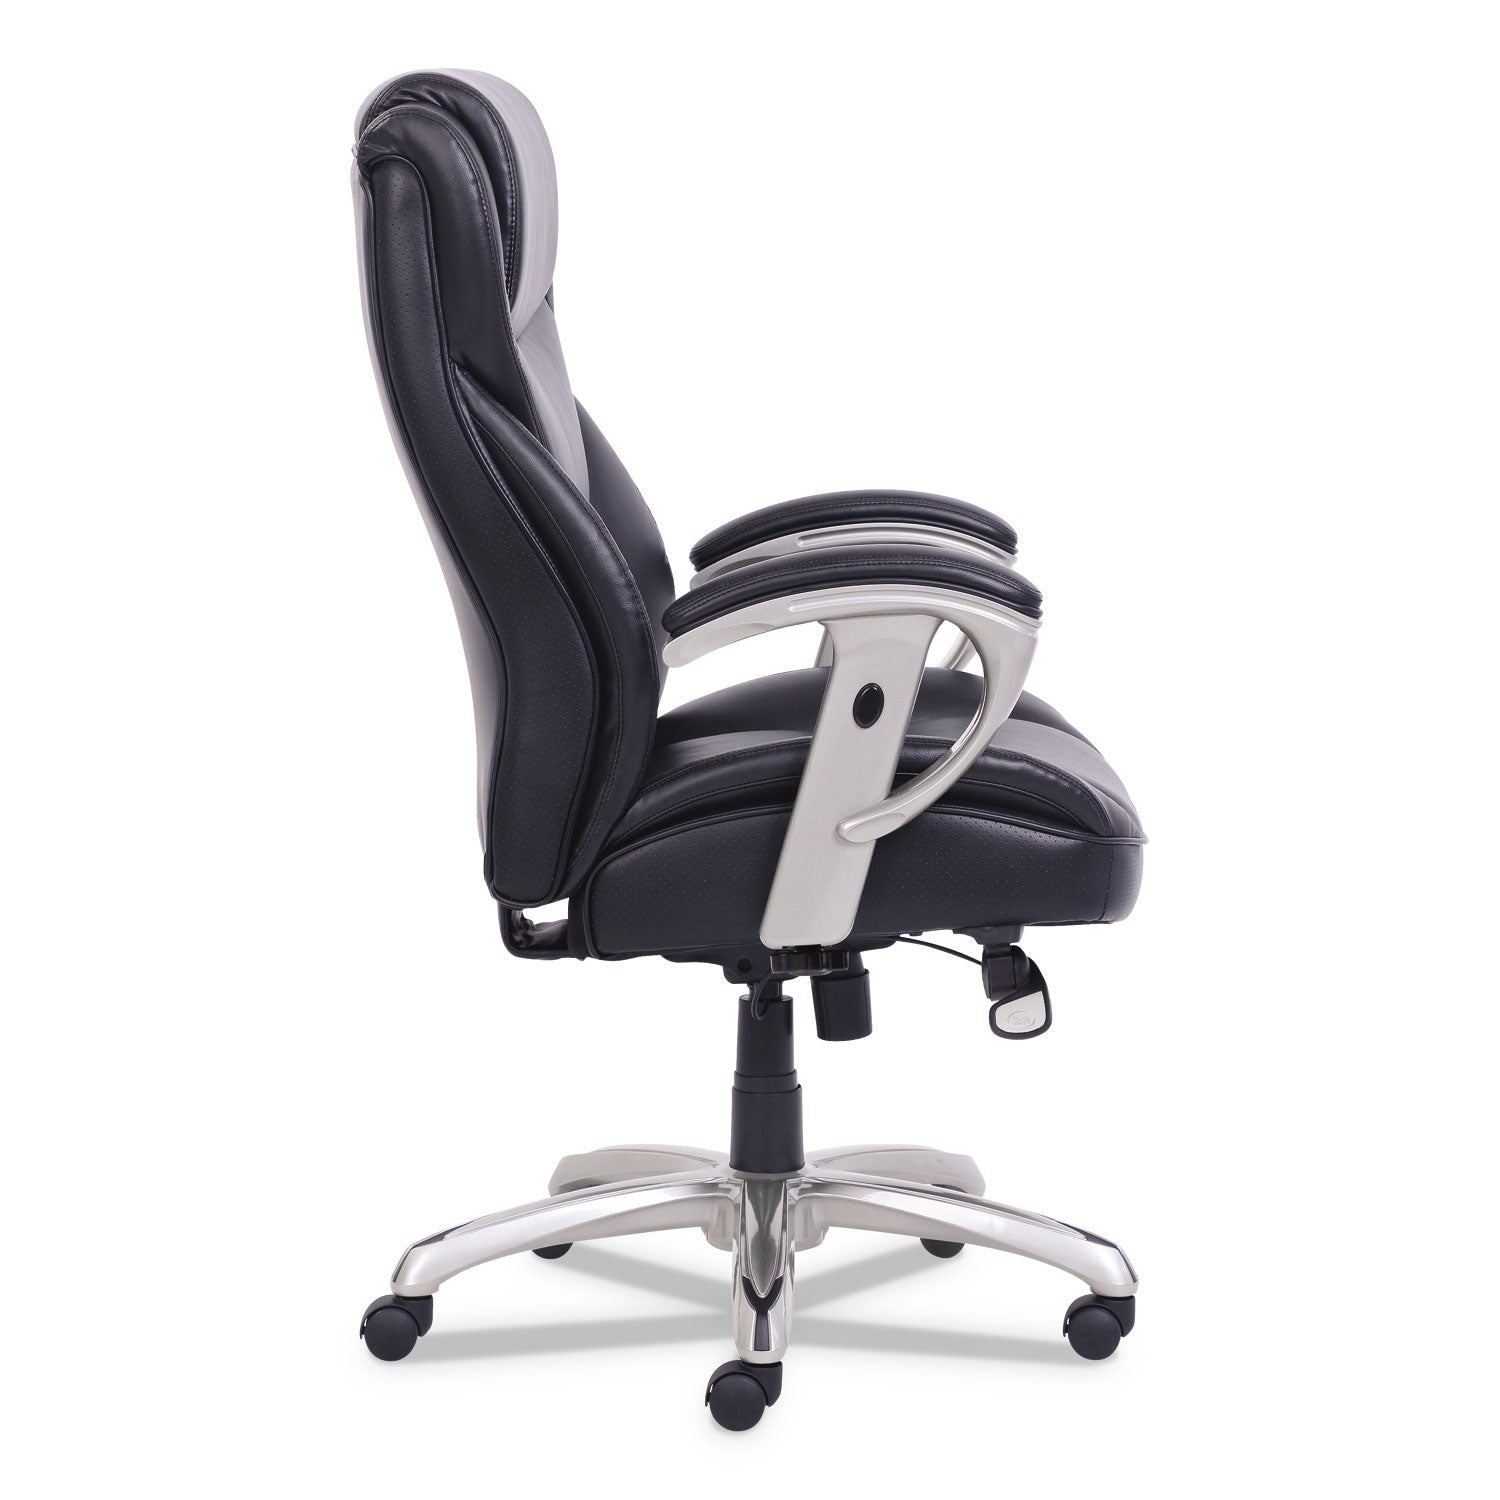 emerson-big-and-tall-task-chair-supports-up-to-400-lb-195-to-225-seat-height-black-seat-back-silver-base_srj49416blk - 3